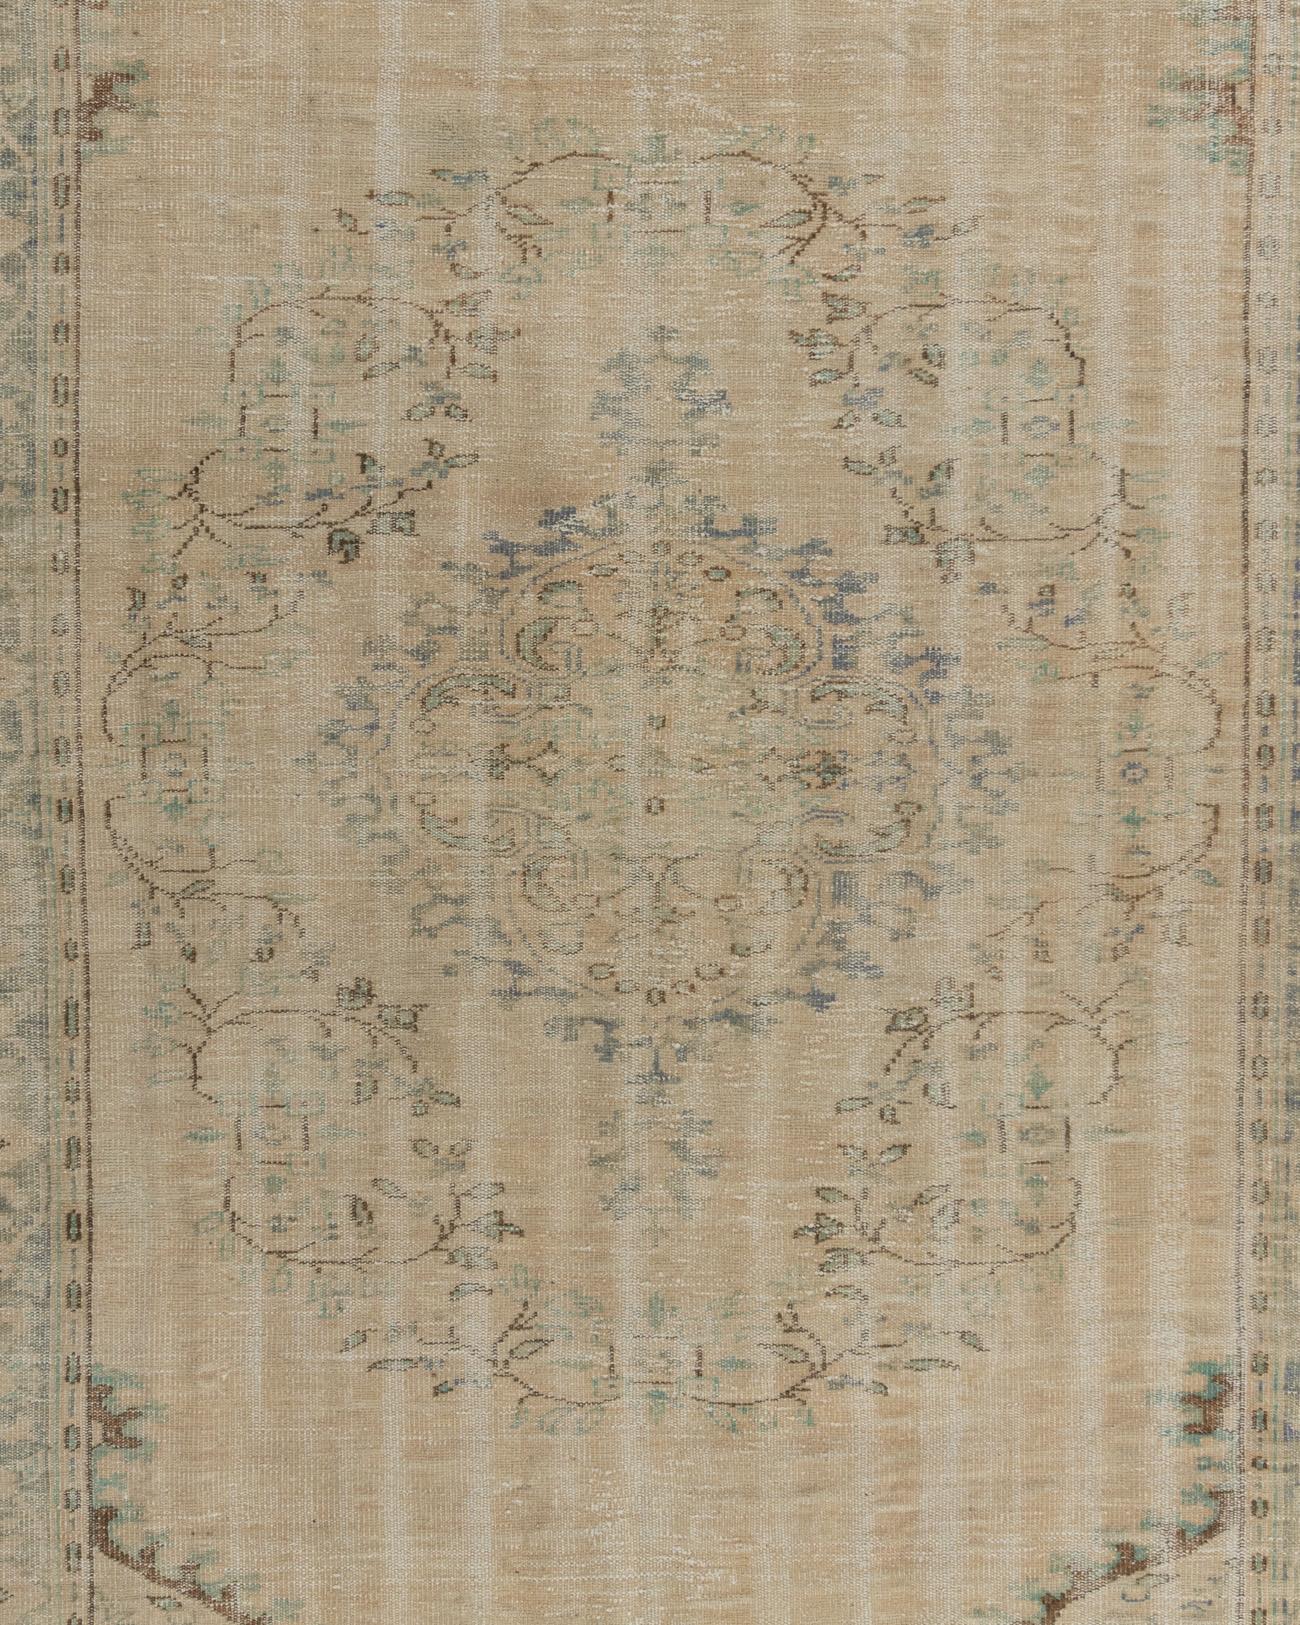 Vintage Distressed Turkish Oushak rug 7'4 X 10'10. Even today, Oushak rugs are still the first choice of professional interior designers. Sometimes this is because when grading Oushak carpets, carpet connoisseurs will not only look at the overall